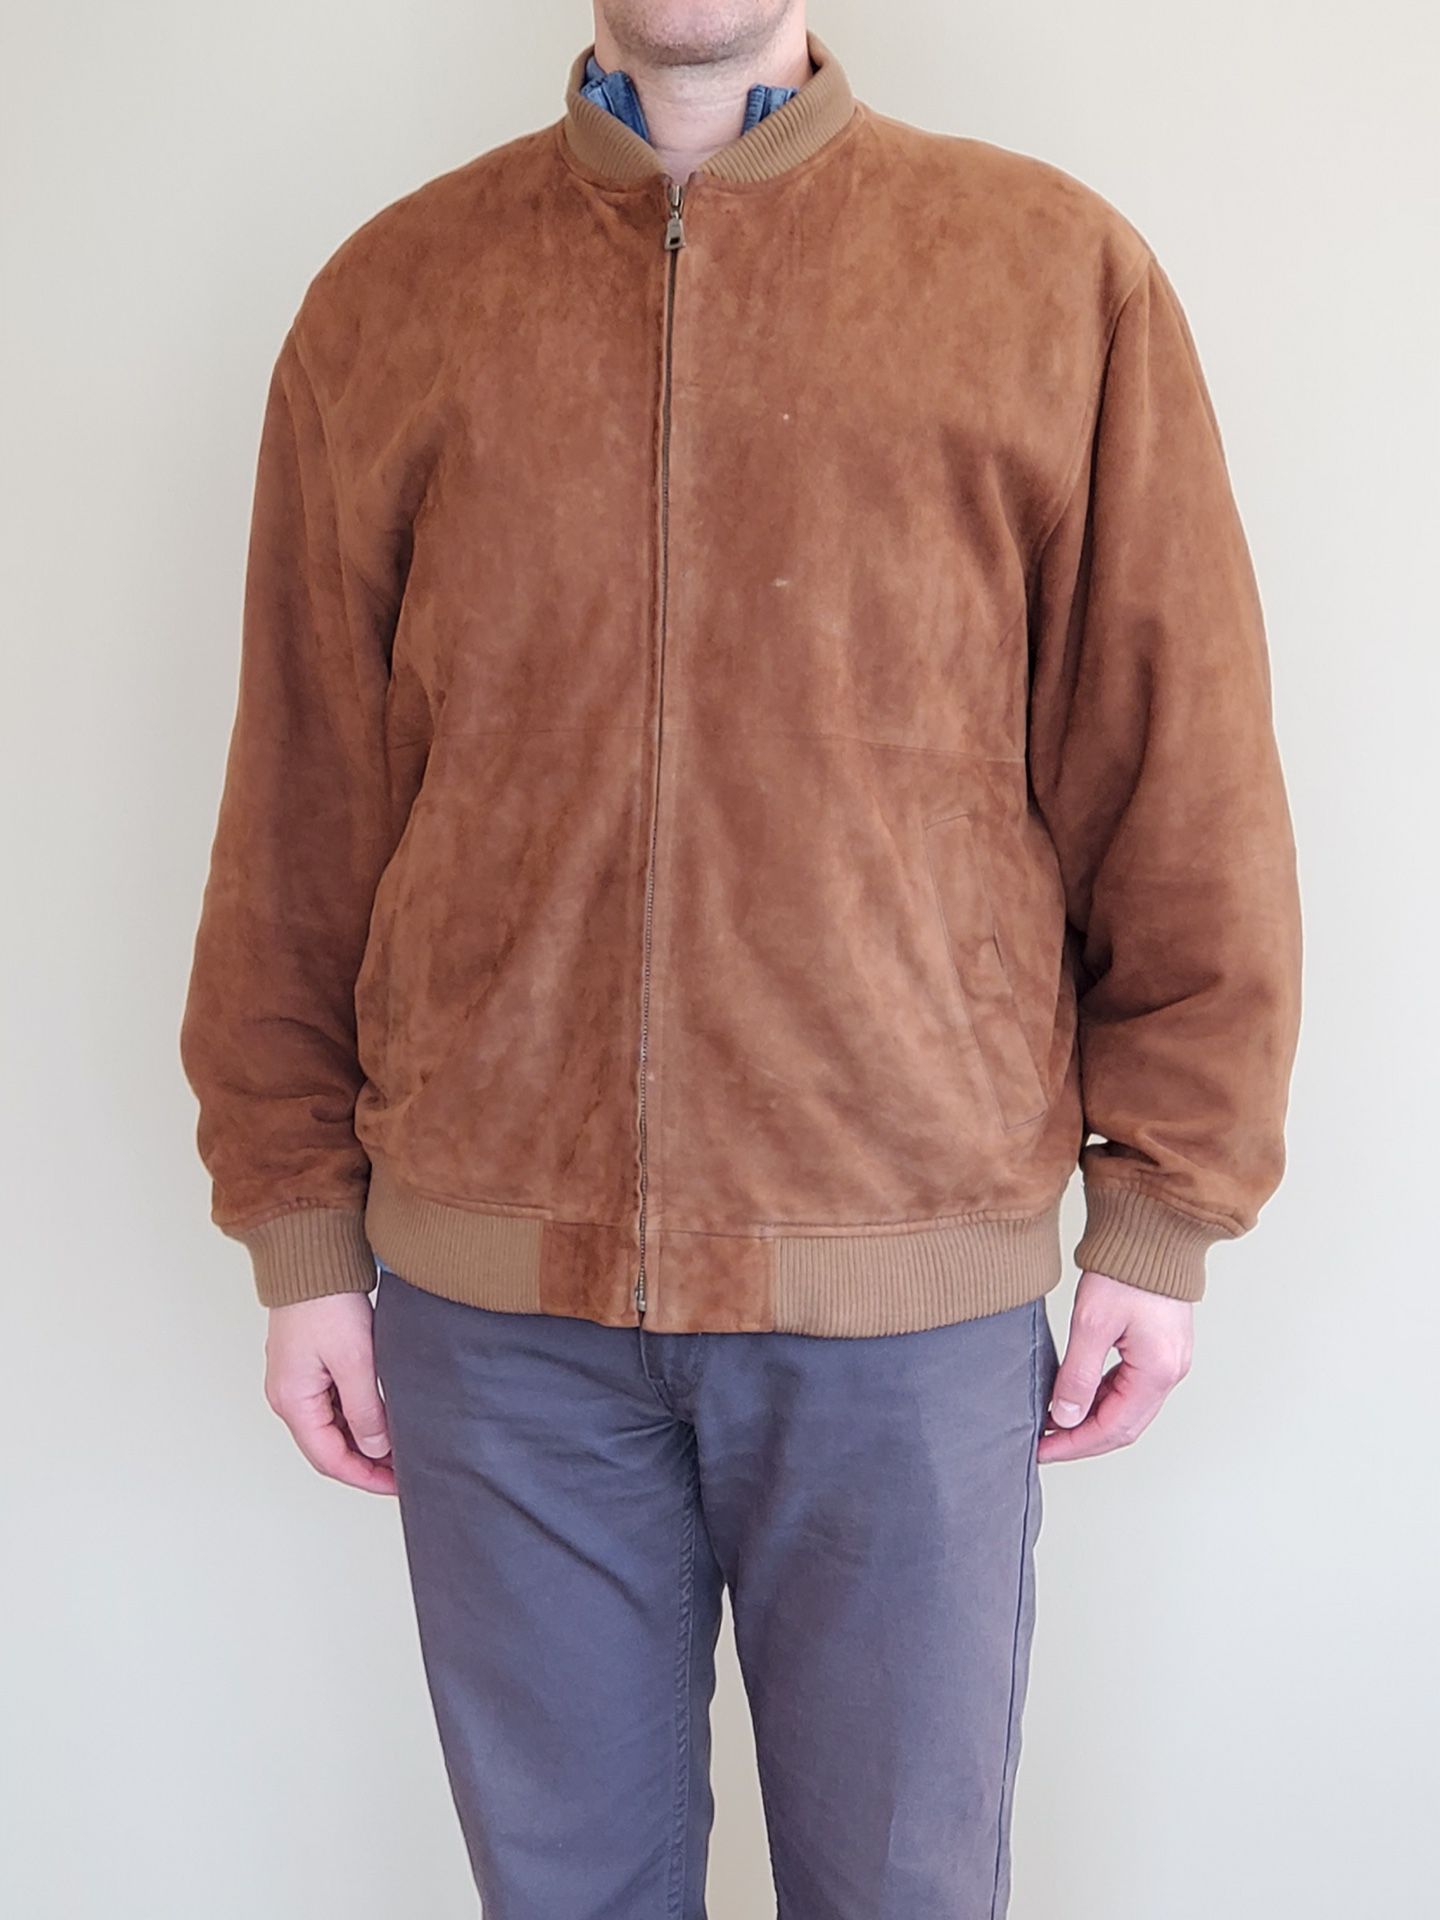 MEN’s High-Quality, SOFT SUEDE LEATHER JACKET - Size LARGE (pls see all photos & full details) - firm price